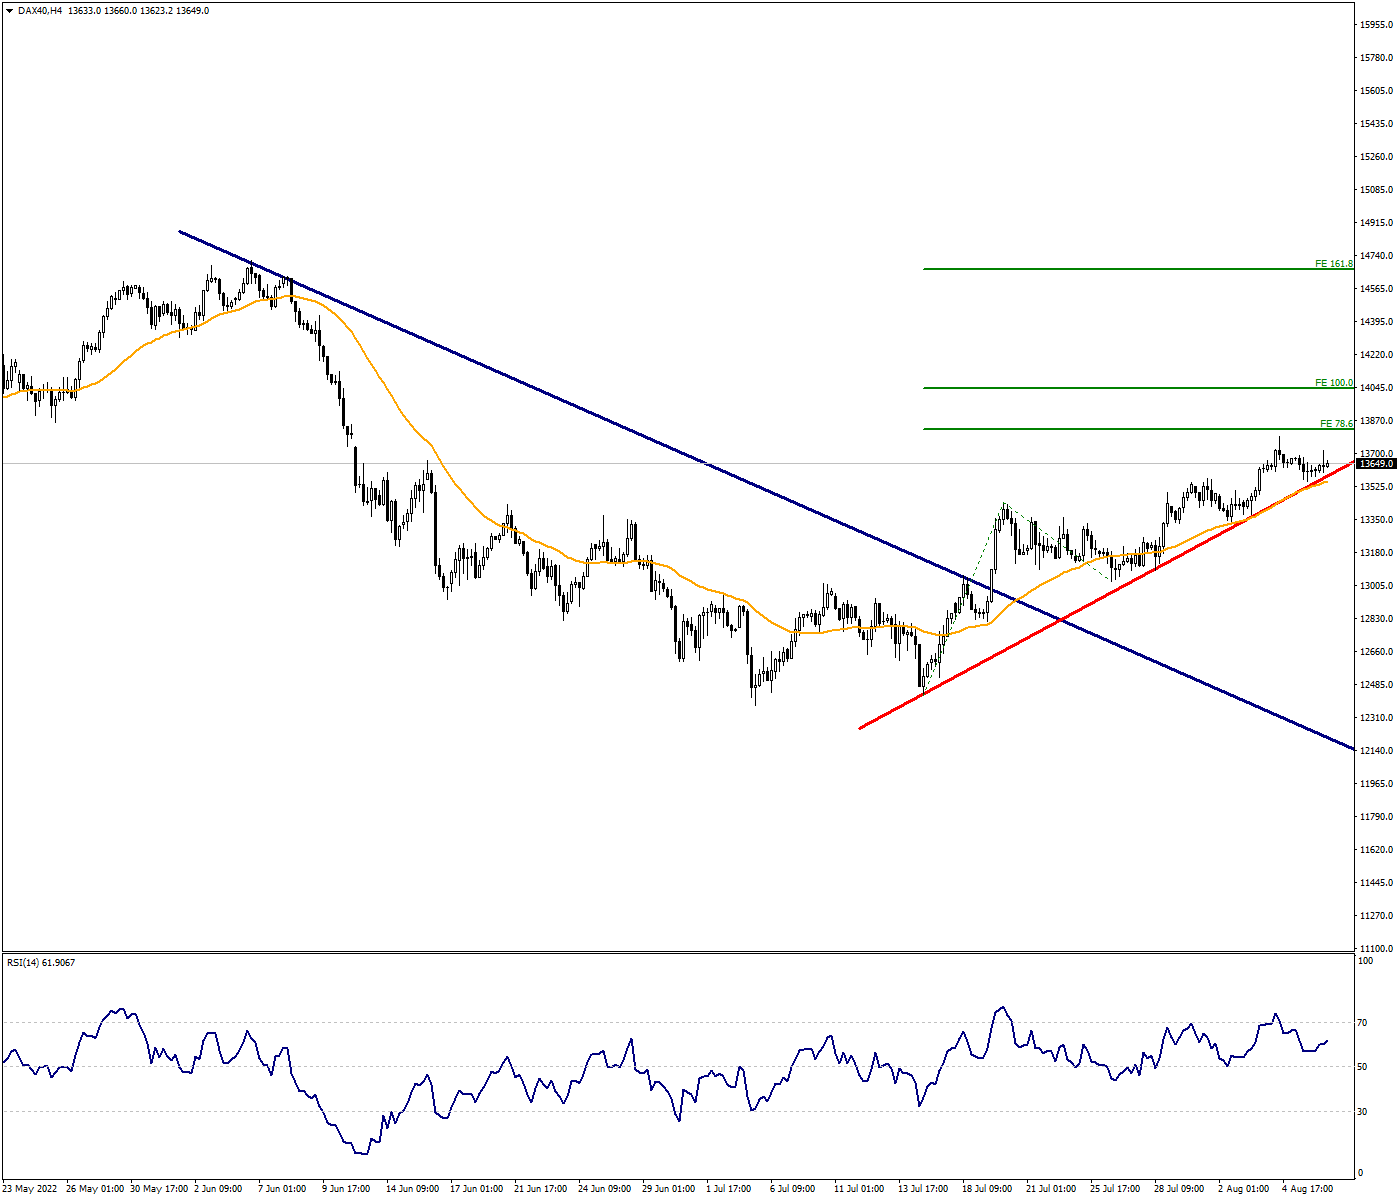 DAX40 Continues Positive Divergence